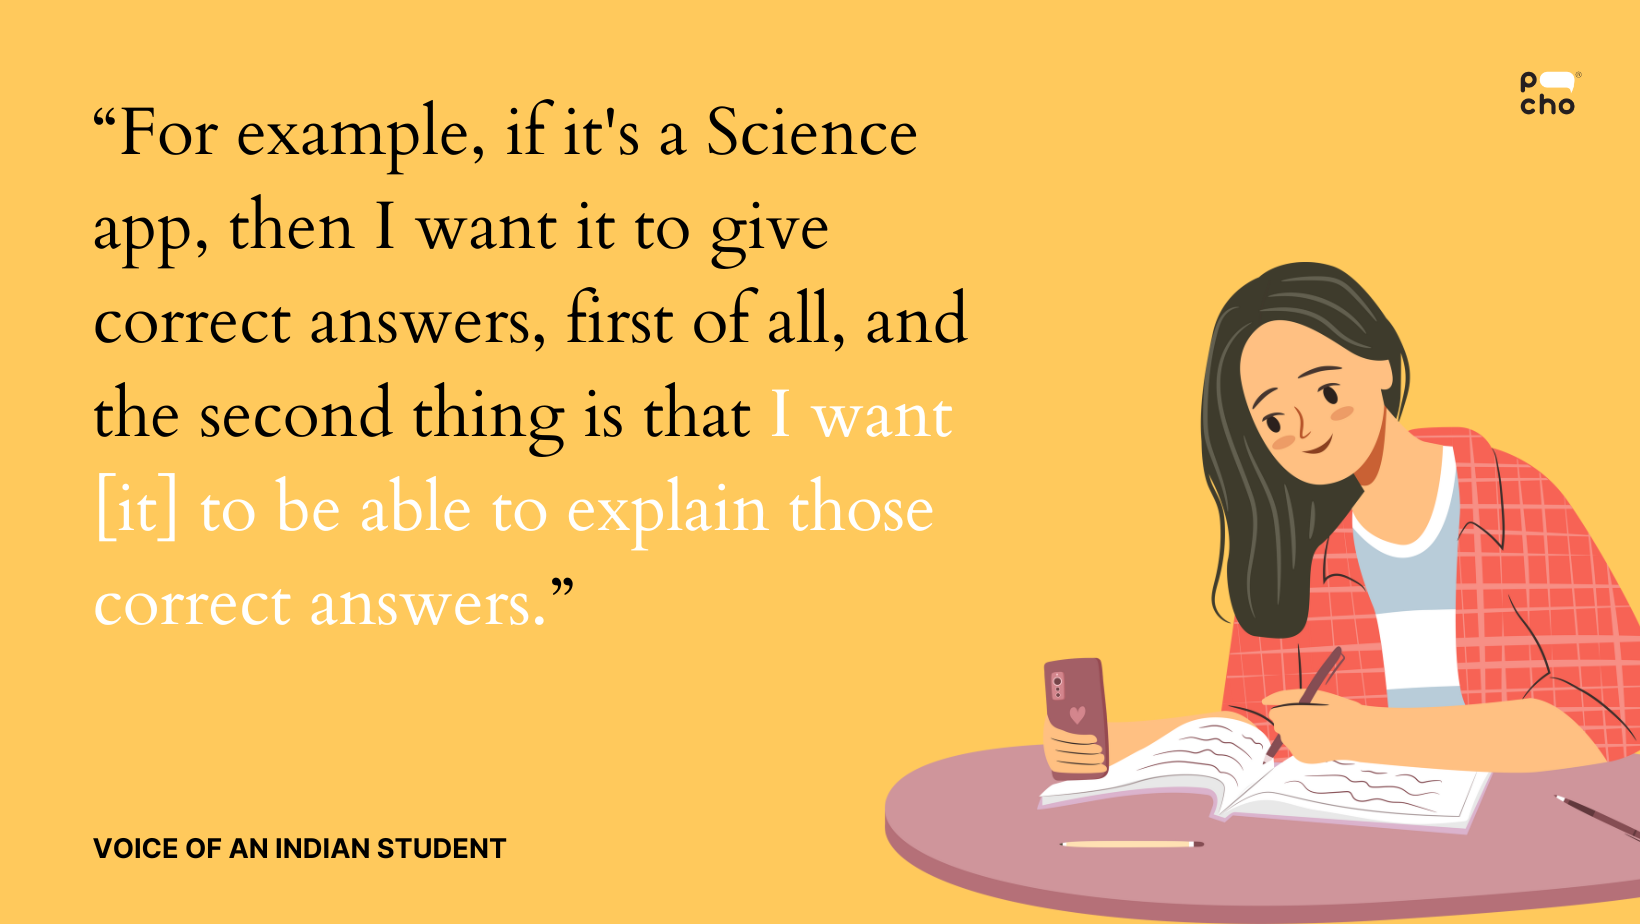 💬What does this 10th grader like about apps like Khan Academy?